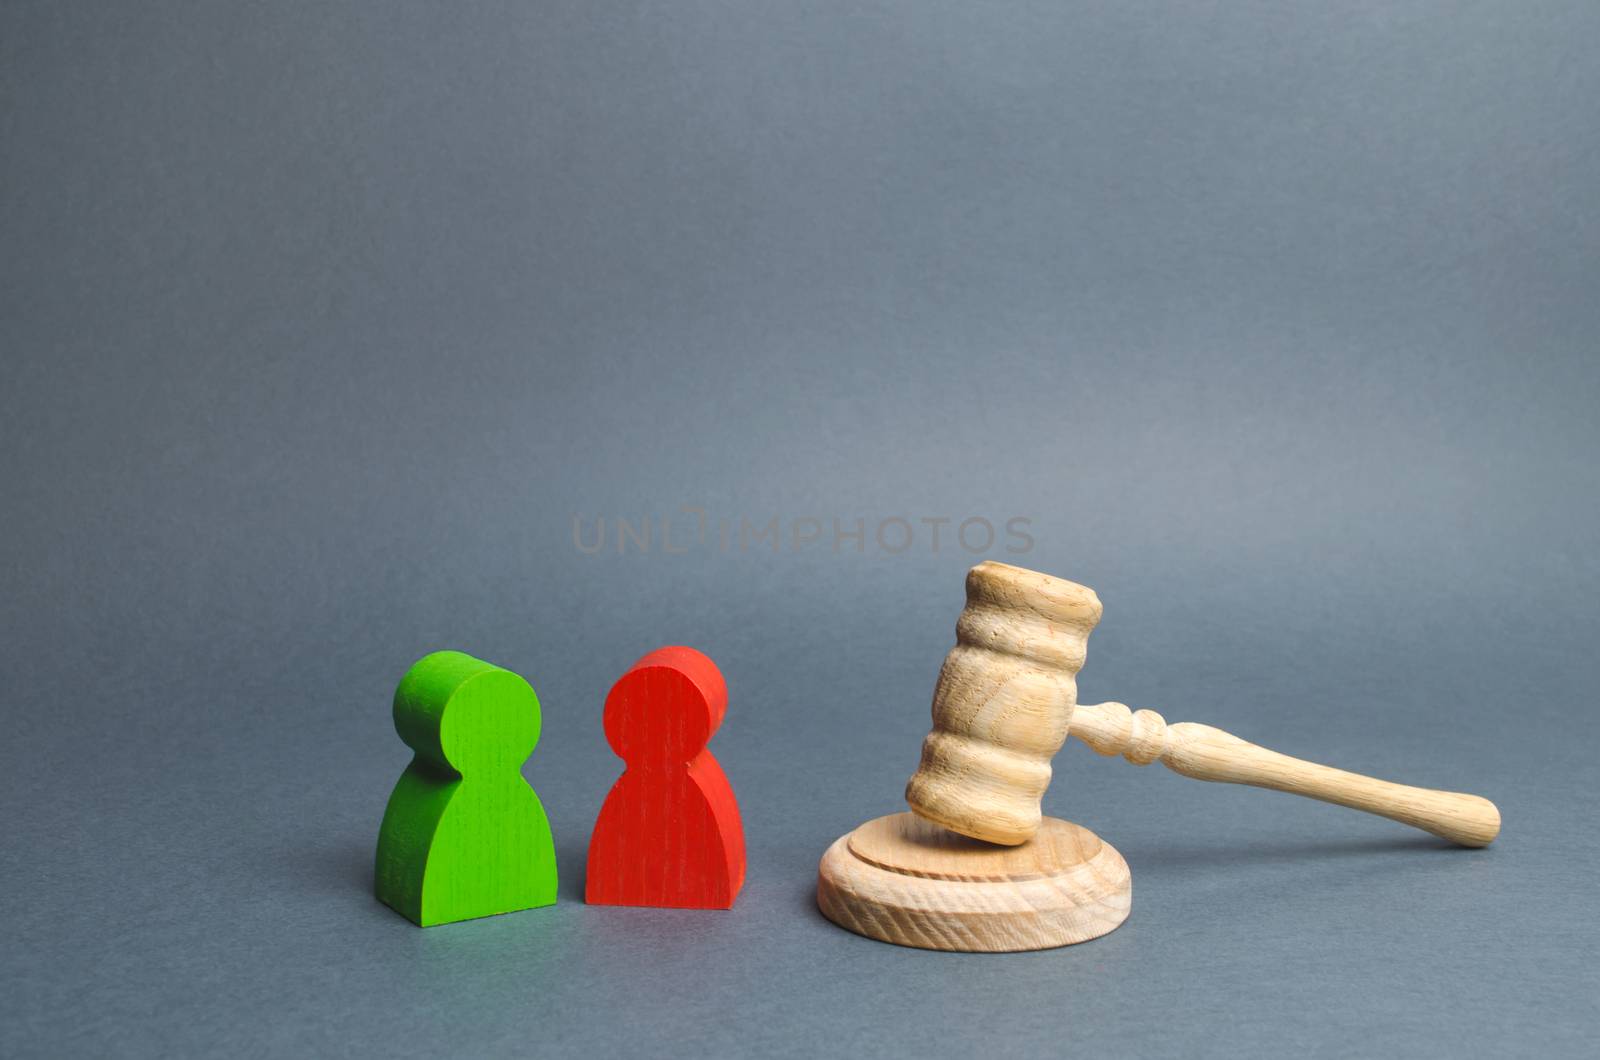 Two figures of people opponents stand near the judge's gavel. Conflict resolution in court, claimant and respondent. Court case, resolution and disputes settling disputes. The judicial system. by iLixe48